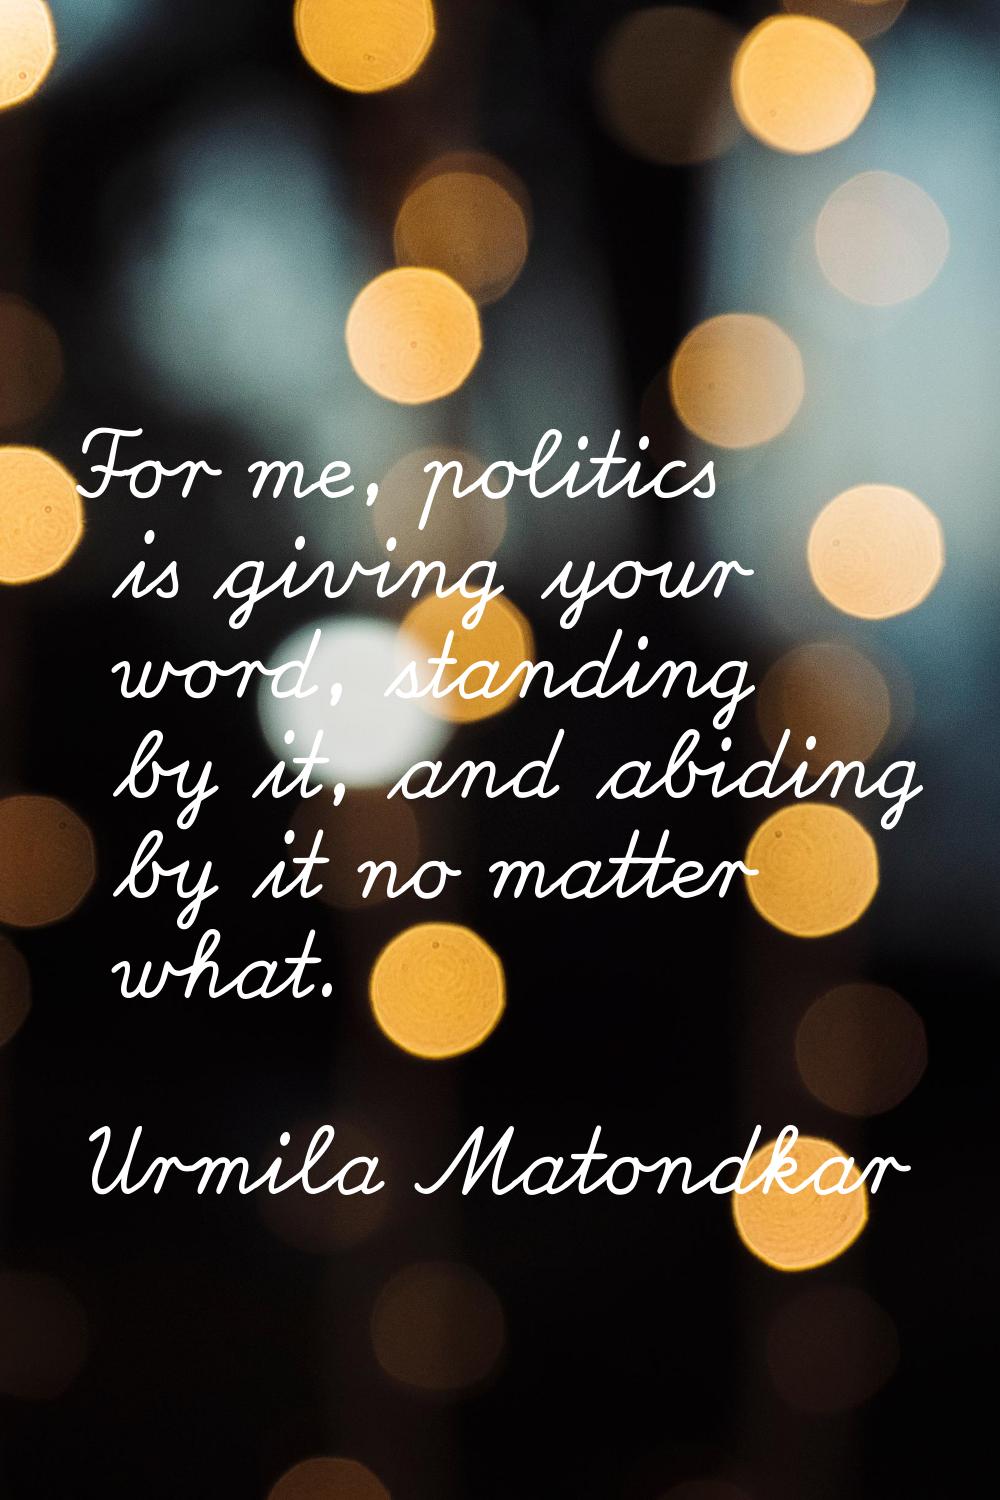 For me, politics is giving your word, standing by it, and abiding by it no matter what.